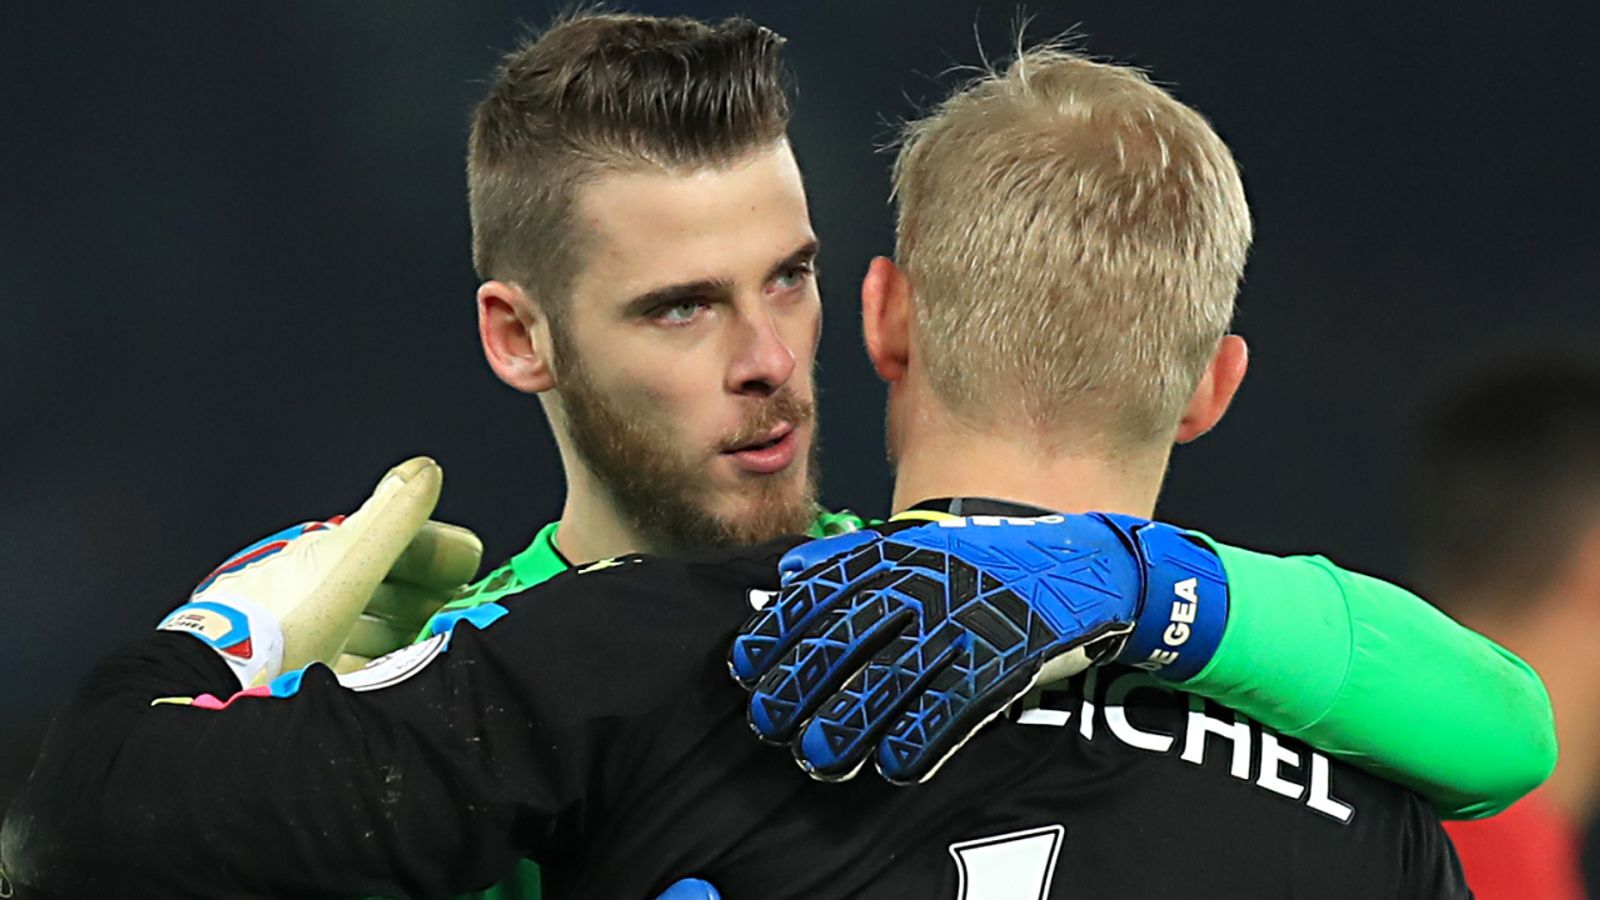 Bischoff: Schmeichel Is a Really Large Supporter of the United